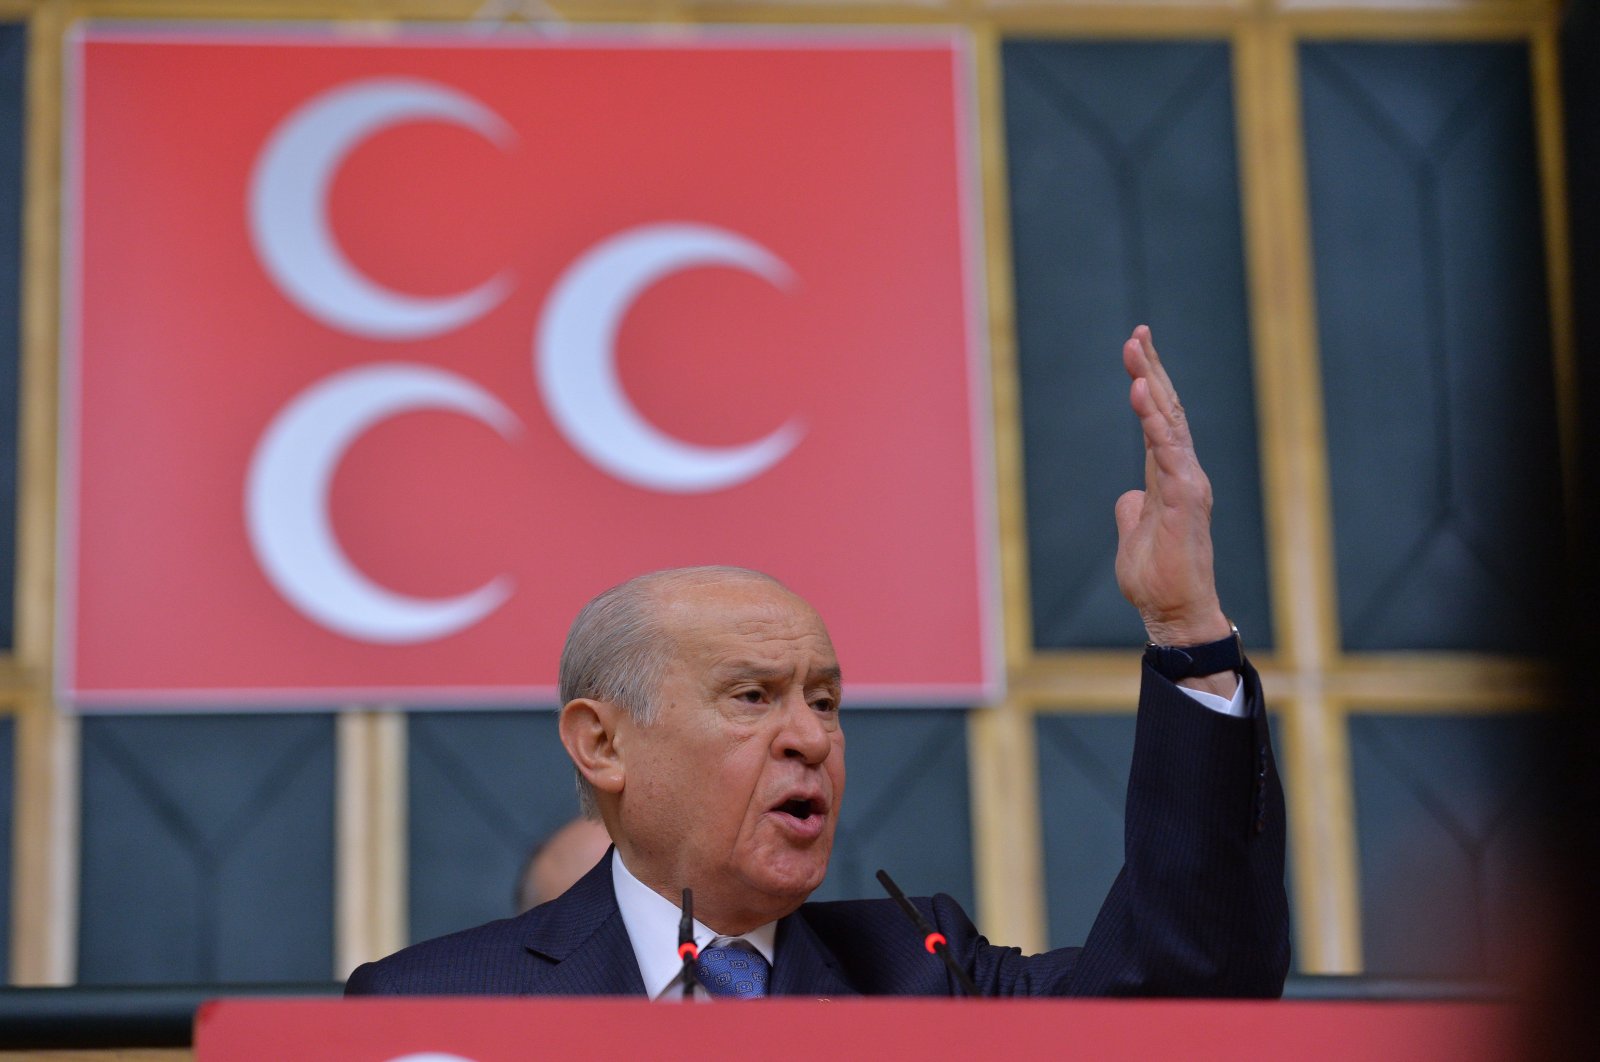 MHP leader Devlet Bahçeli speaks at his party's group meeting at Parliament, March 6, 2018. (Photo by Ali Ekeyilmaz)